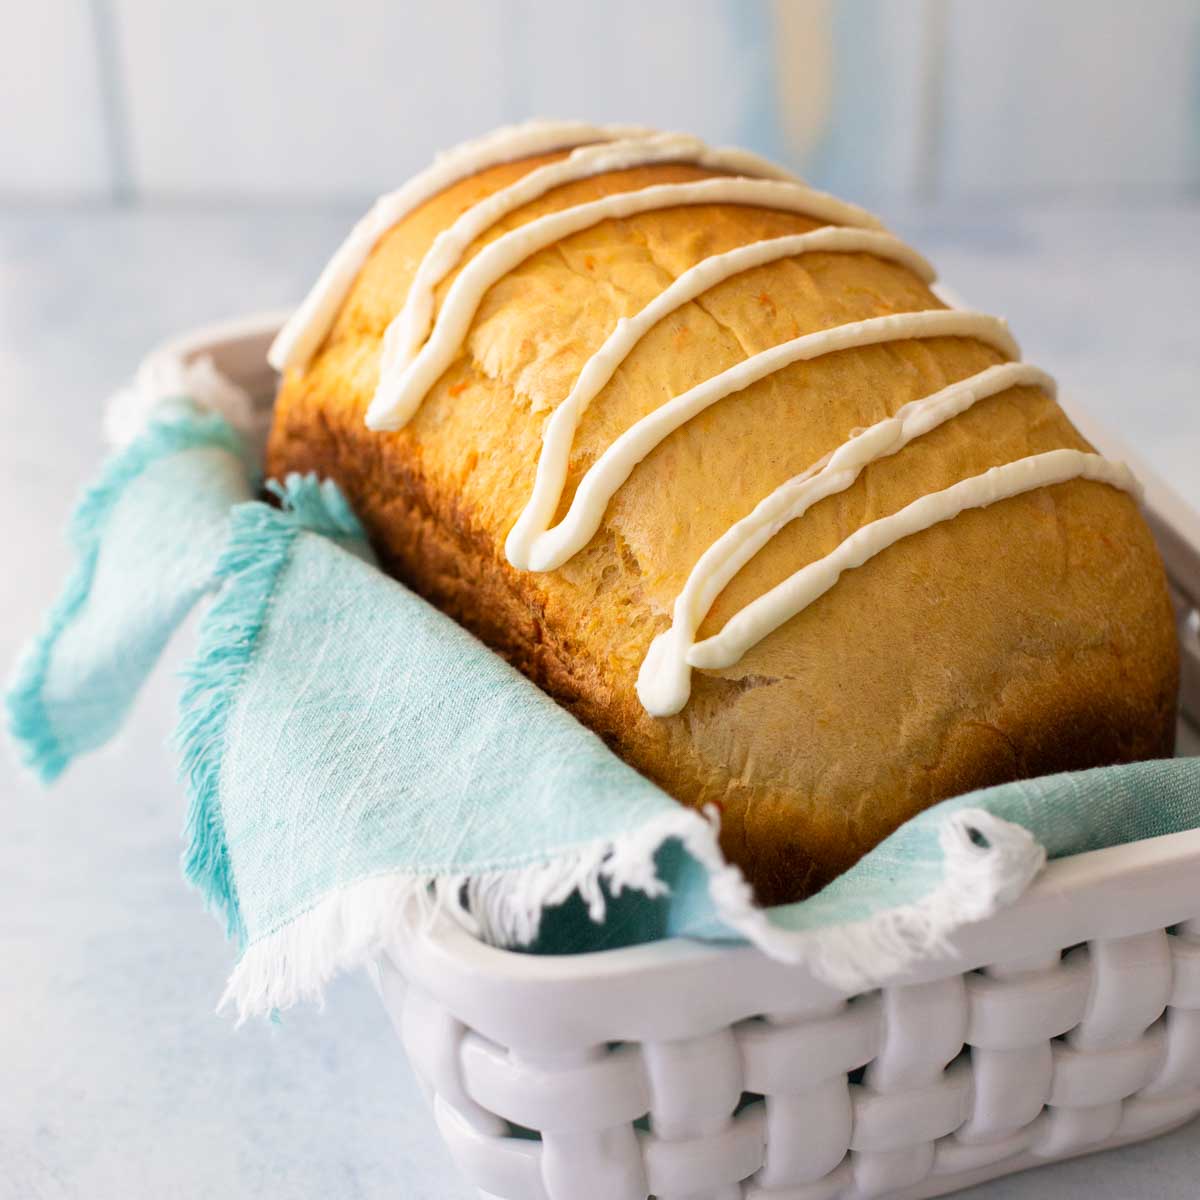 An iced loaf of carrot cake bread sits in a white bread basket with a blue napkin.